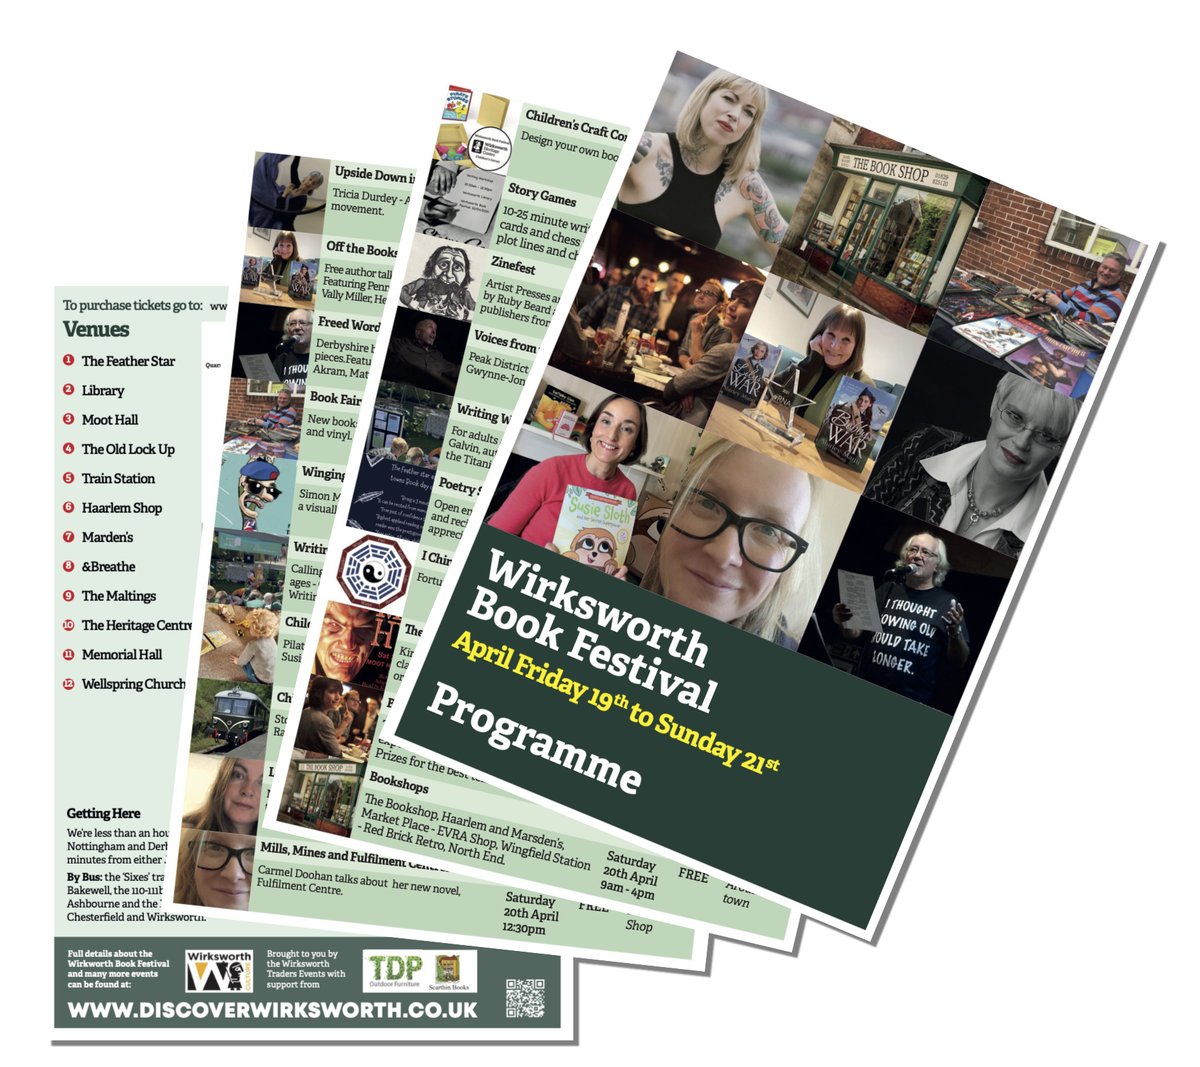 The printed book festival programme comes out Fri 5 April. Get the whole run down of events across town on the 19-2 April. The big day is Sat 20.
Full details - discoverwirksworth.co.uk/event-listings #bookloveruk #bookfestival #authors #booksignings #authortalks #peakdistrict #derbyshire #derby